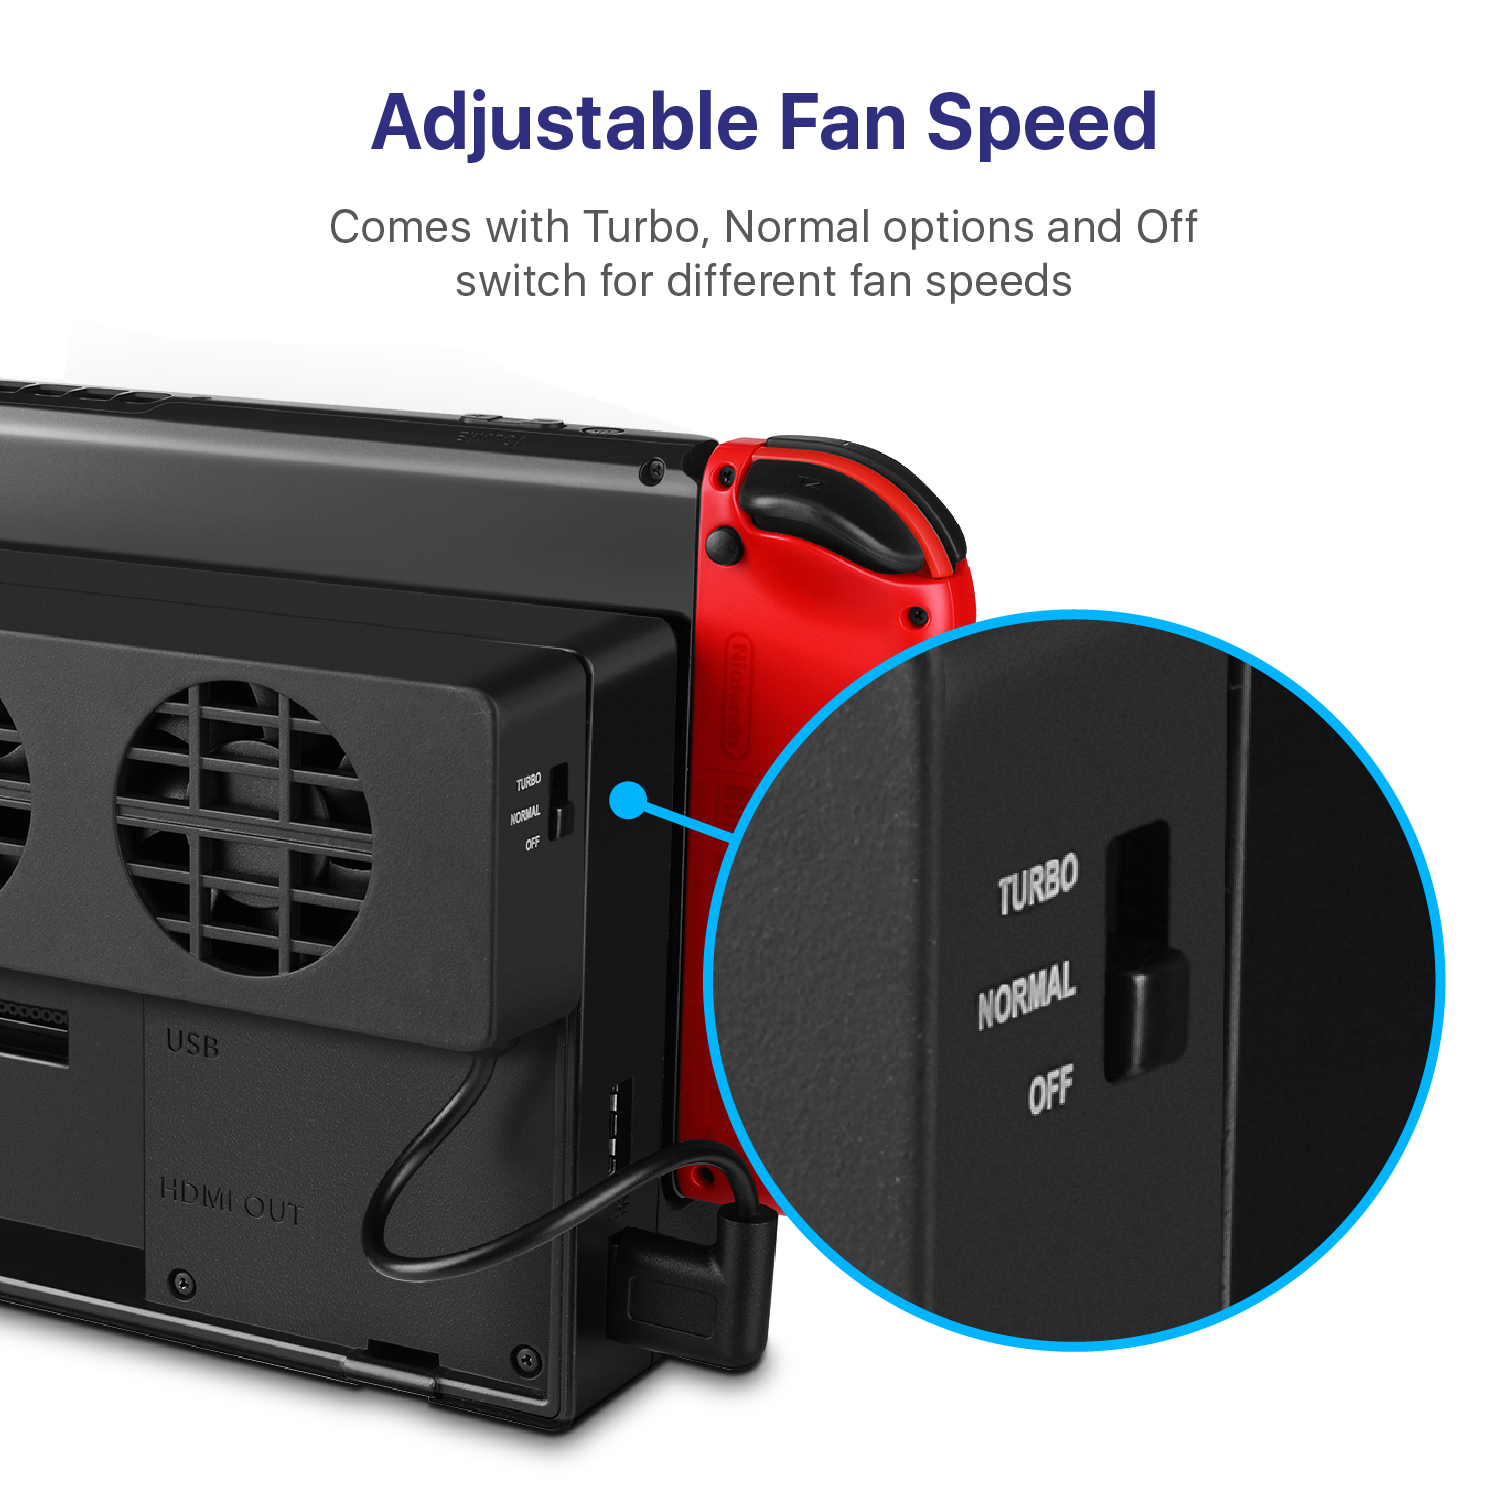 3 High Speed Fans - Built-in 3 cooling fans provide strong ventilation performance, lower Switch console's temperature fast, effectively and quietly; Prevents overheating from long hours of gaming and further prolongs the life span of the gaming system